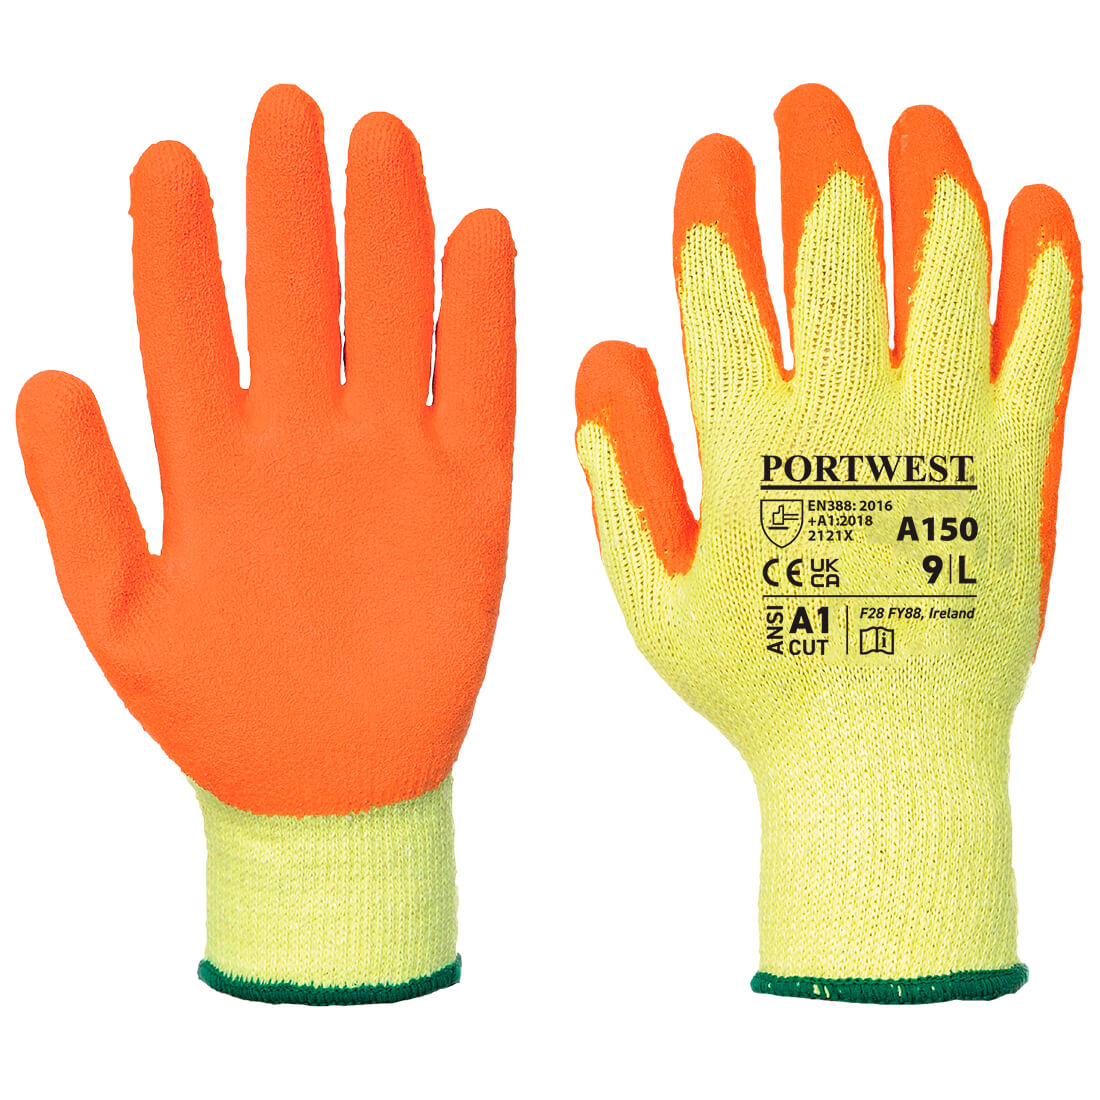  These highly breathable Portwest® A150 Hi-Vis Industrial Work Gloves feature a 10-gauge breathable seamless string knit glove constructed with environmentally recycled yarn and with contrasting crinkle latex coated palms for unmatched grip and enhanced signaling.